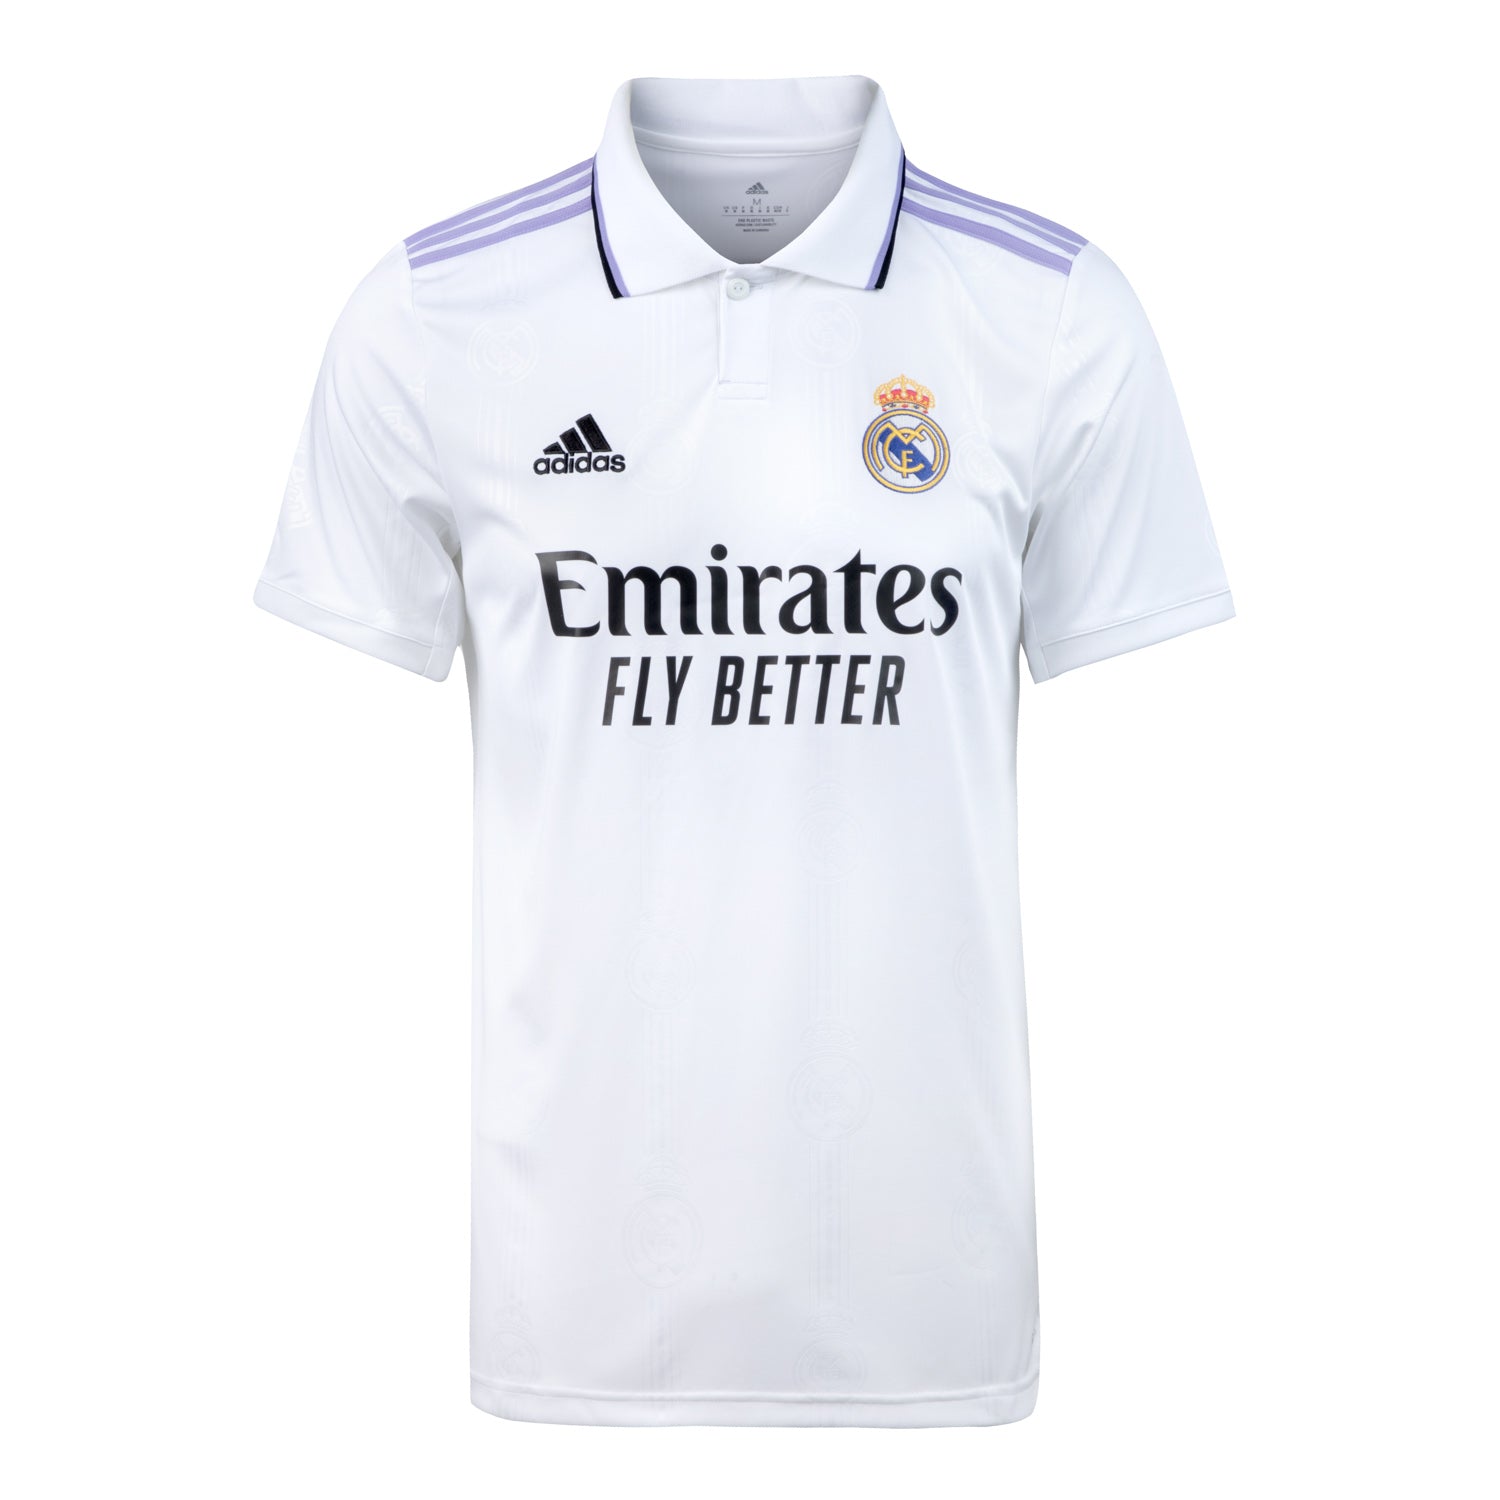 REAL MADRID JERSEY 2022 Y-3 LIMITED EDITION SIZE L SOCCER SHIRT ADIDAS  HI3983